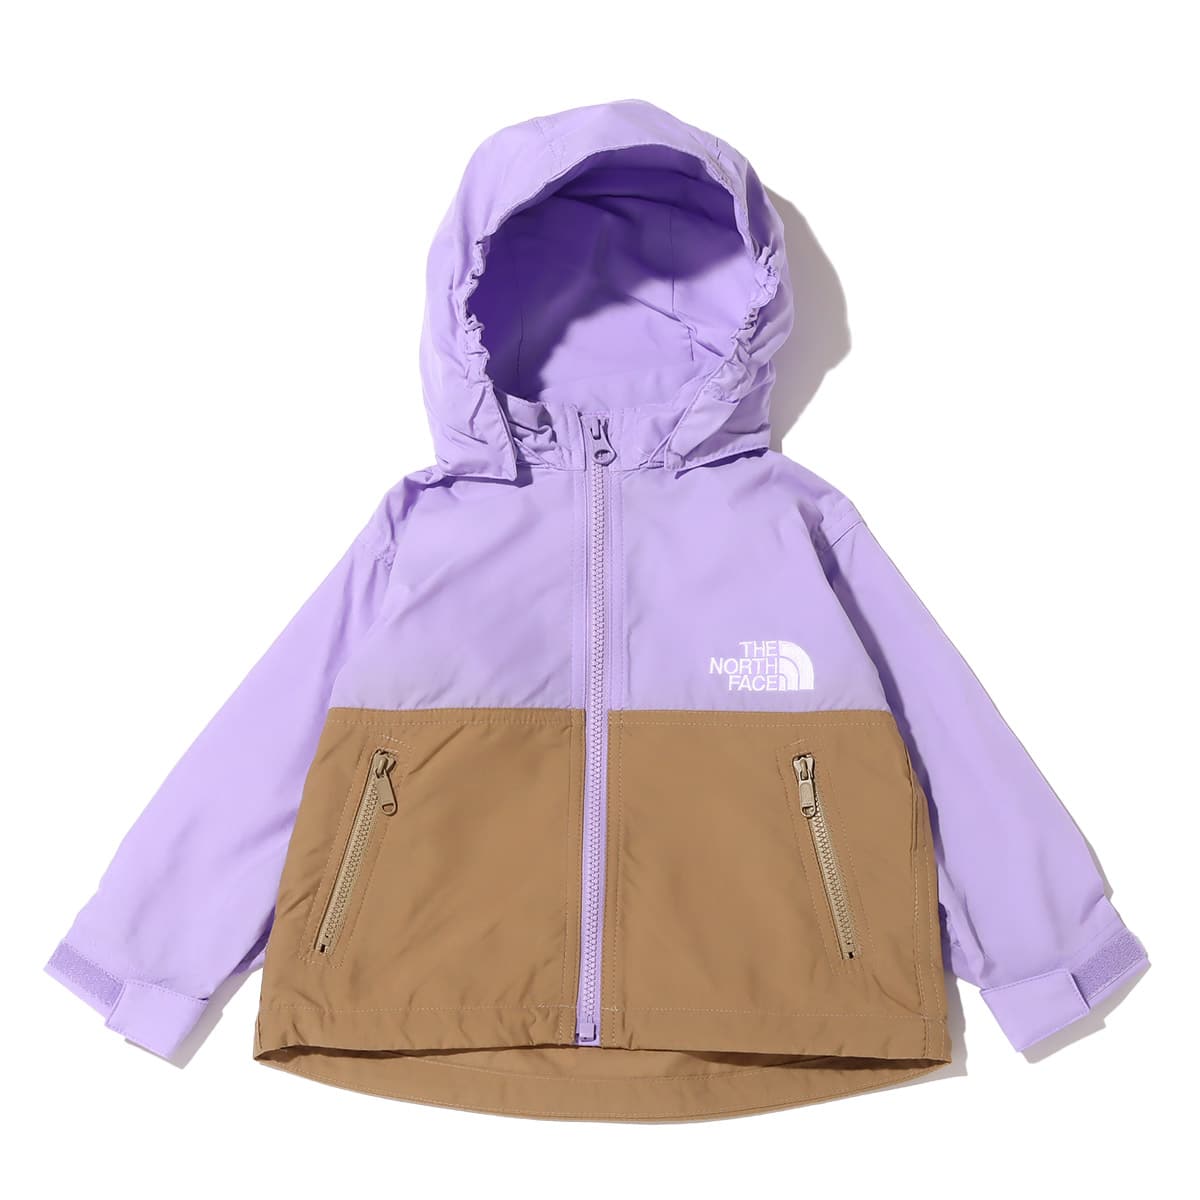 THE NORTH FACE B COMPACT JACKET ラベンダーxケルプタン 23SS-I